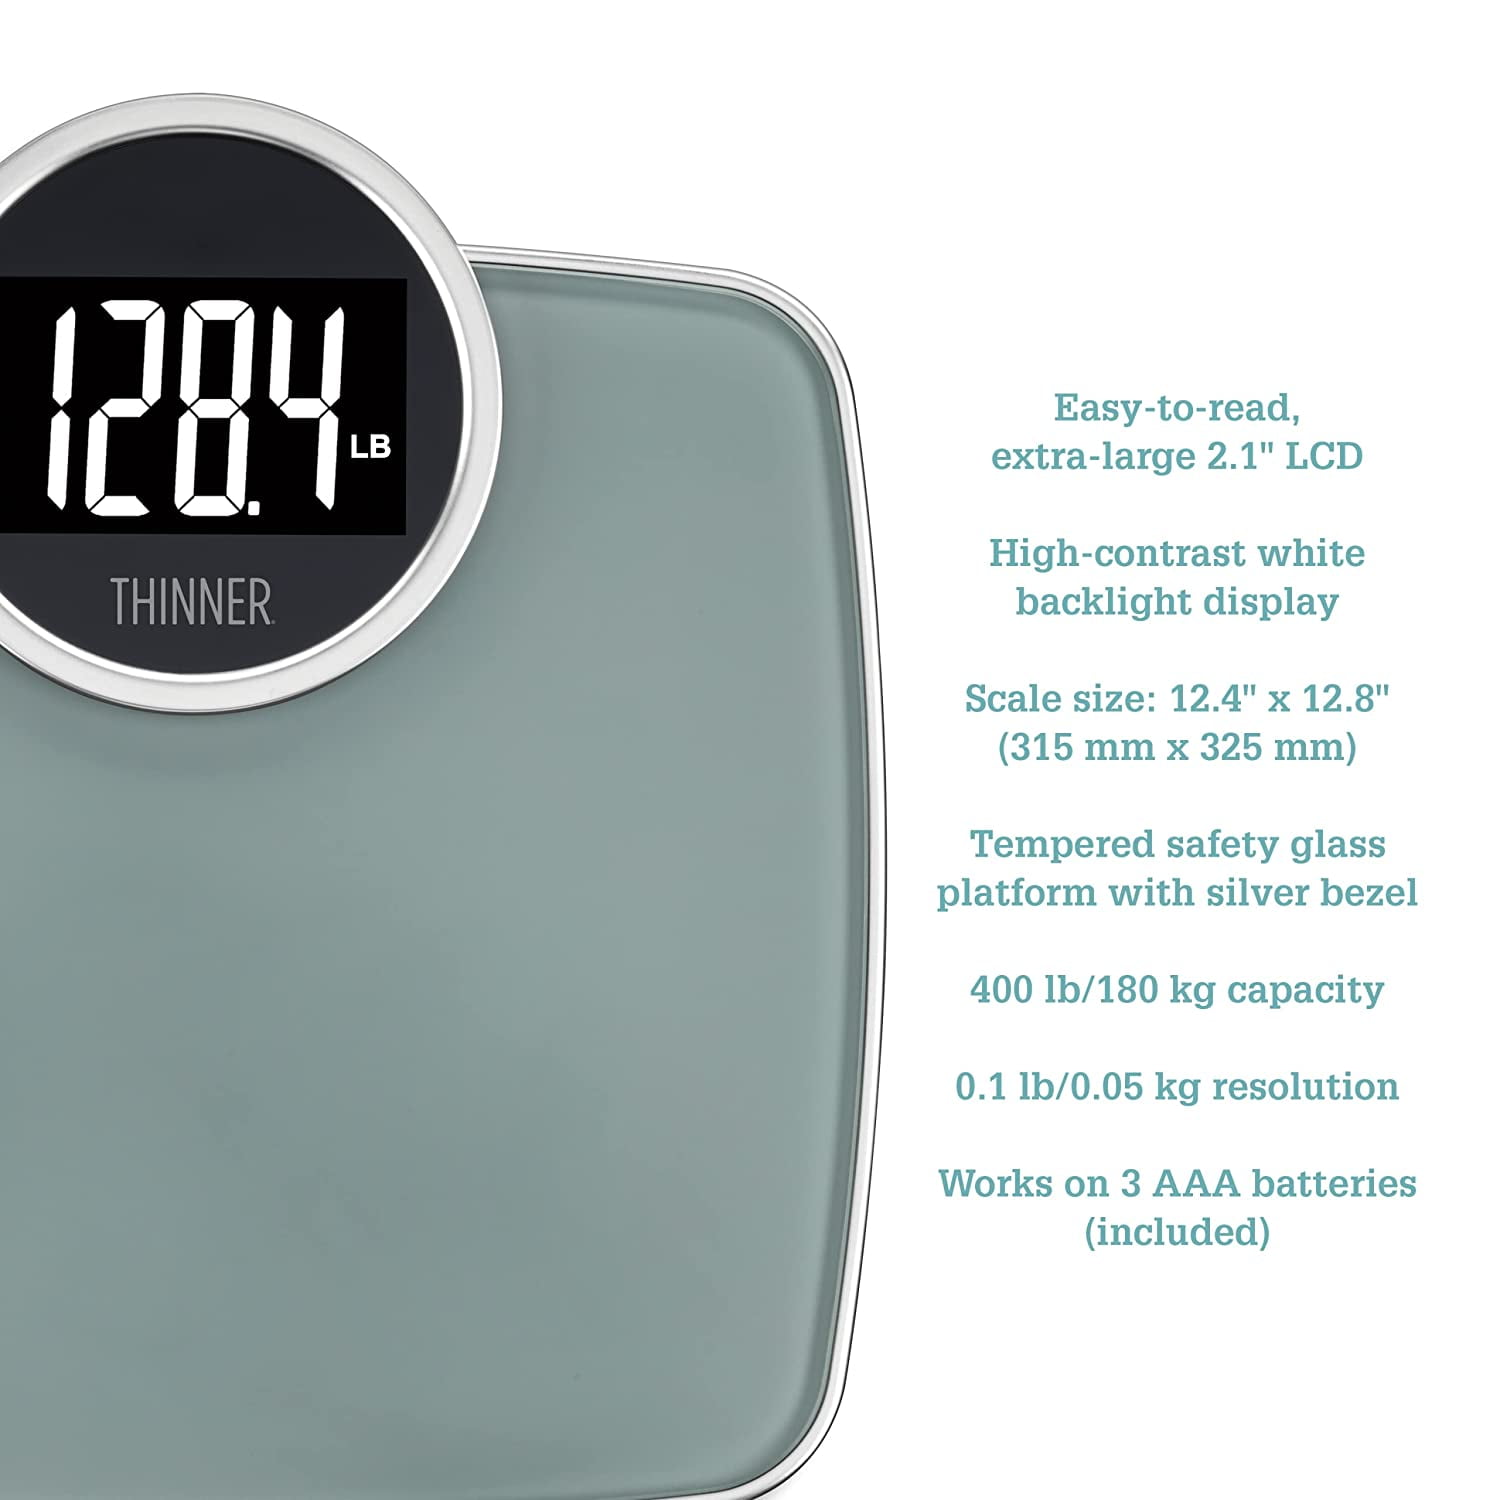 How to Change the Battery of Conair TH300 Weighing Scale 